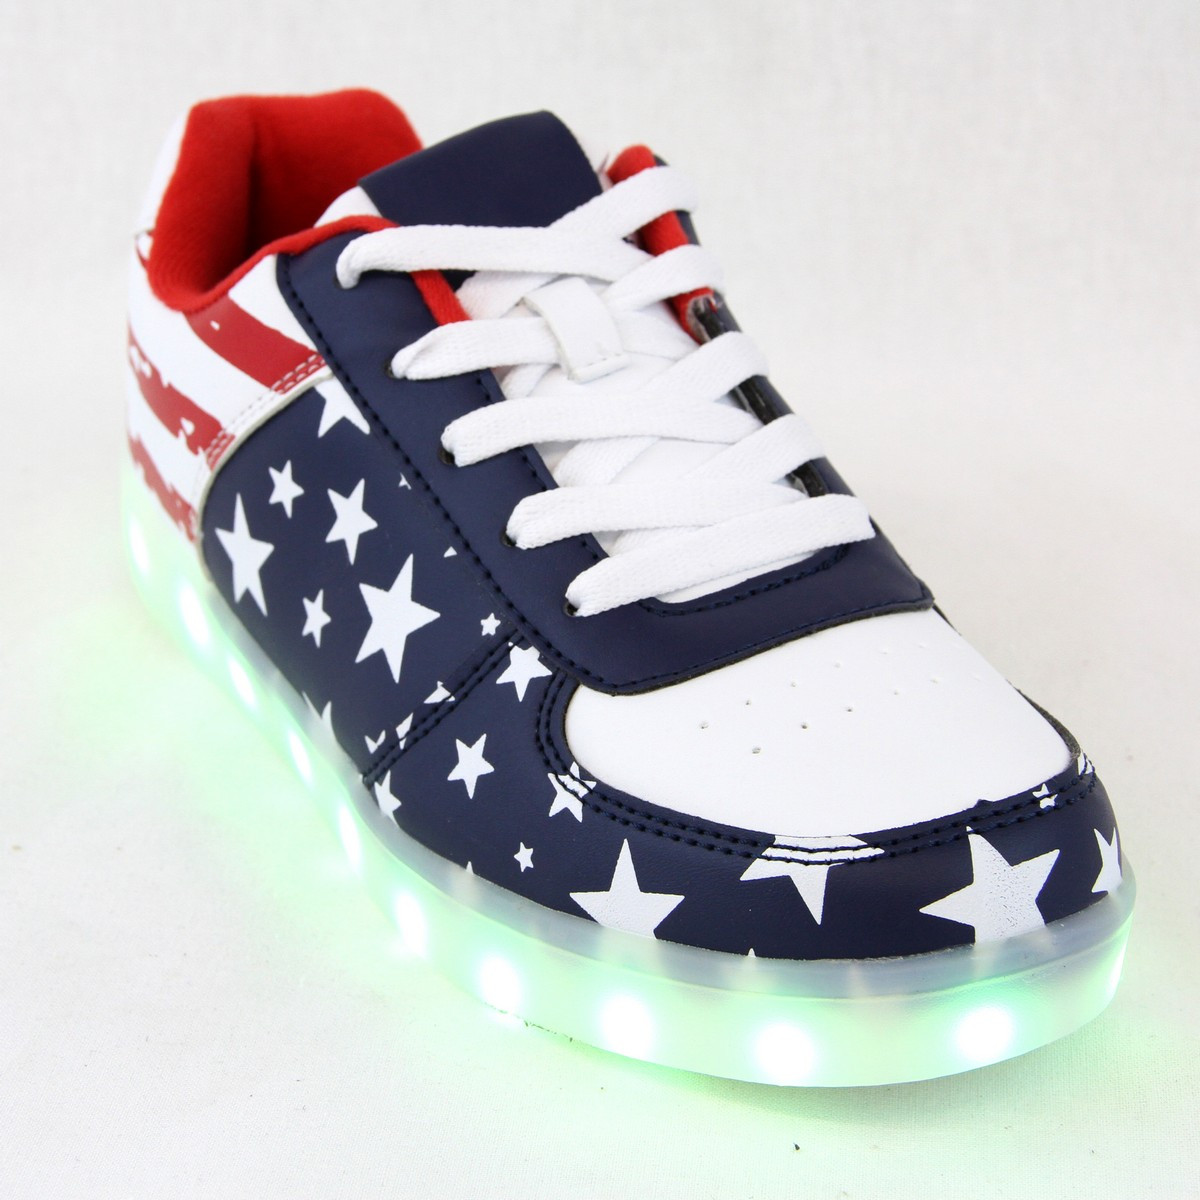 Issue Disappointed translate Women Sneaker Lightweight 7 Mode LED Light Up Tennis Shoes USA Flag